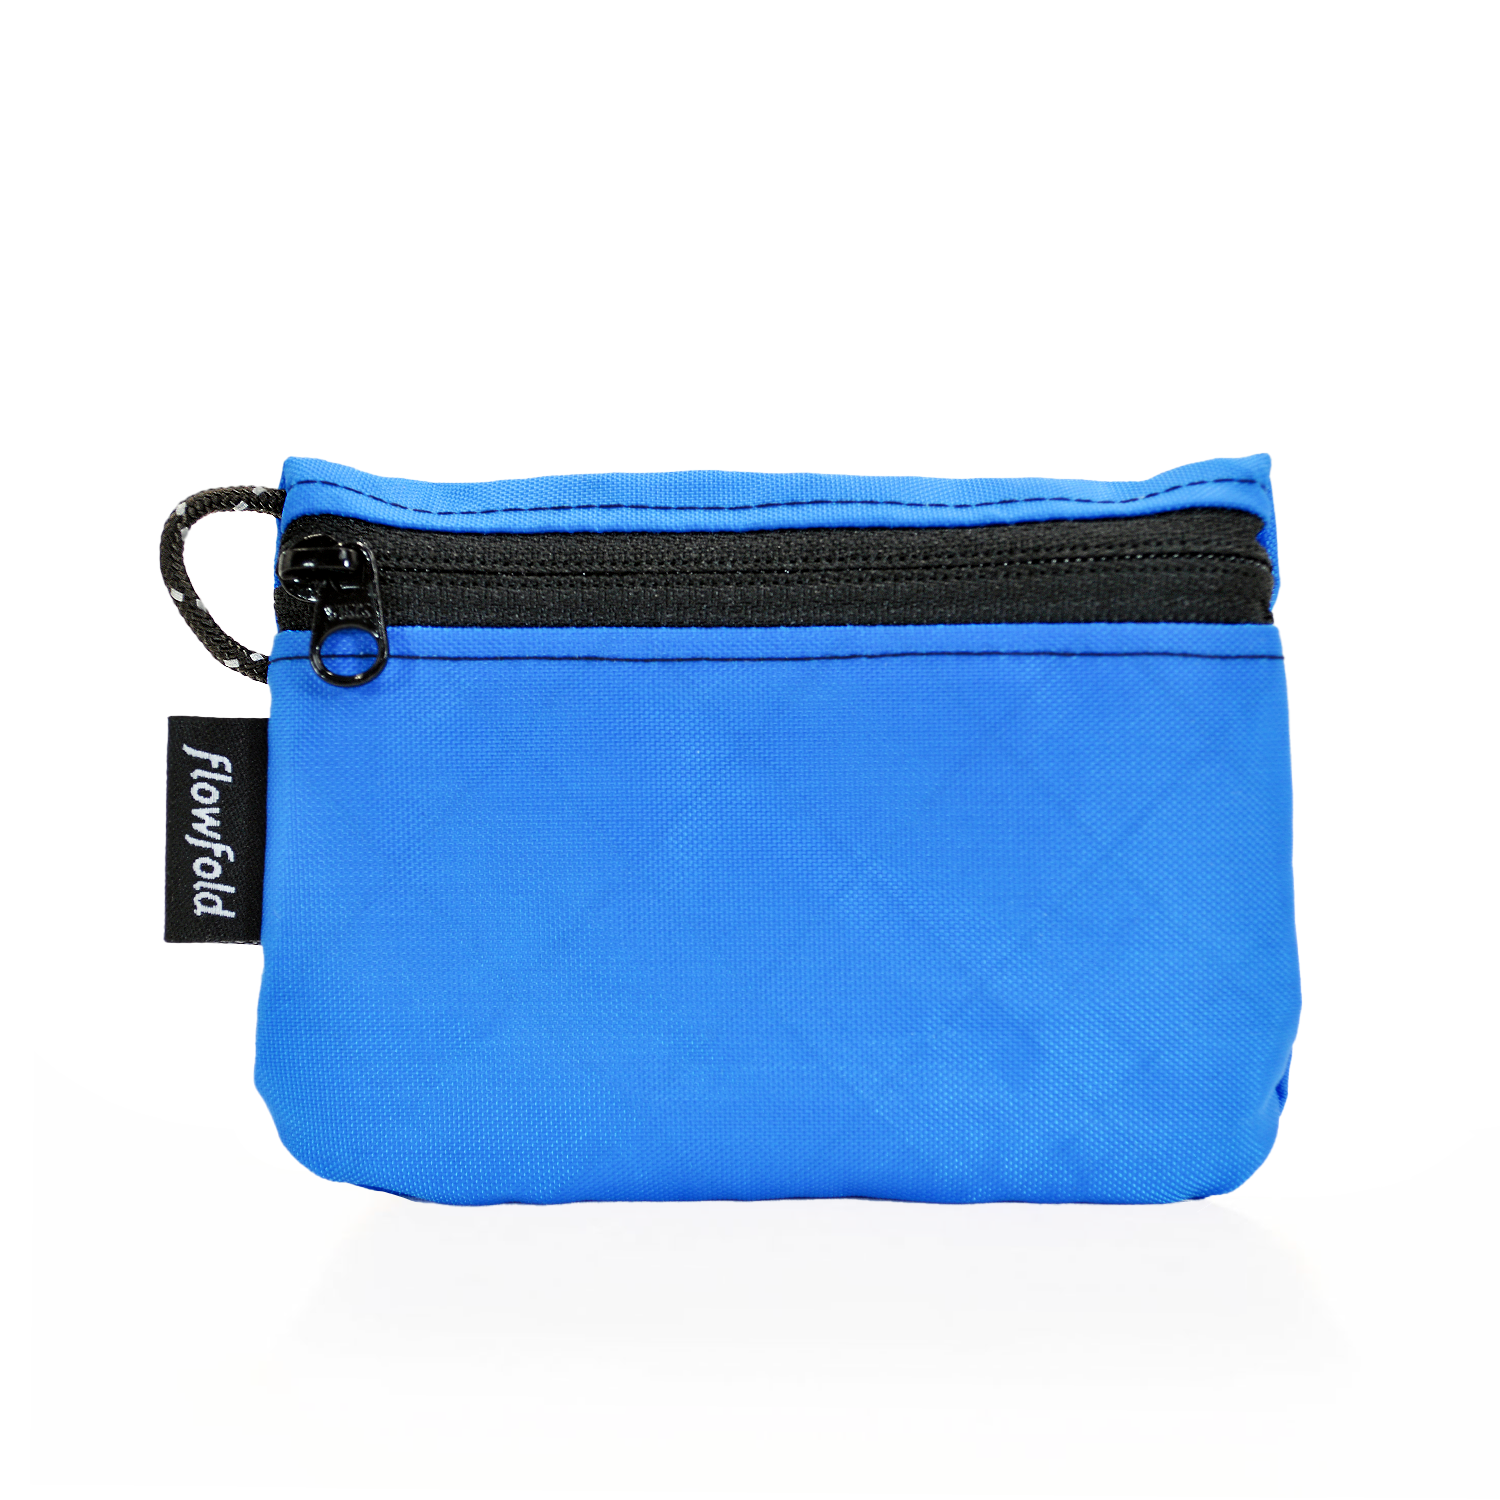 Flowfold Recycled Blue, Essentialist Coin Pouch Wallet For Cash, Cards, and Coins Made in USA, Maine by Flowfold